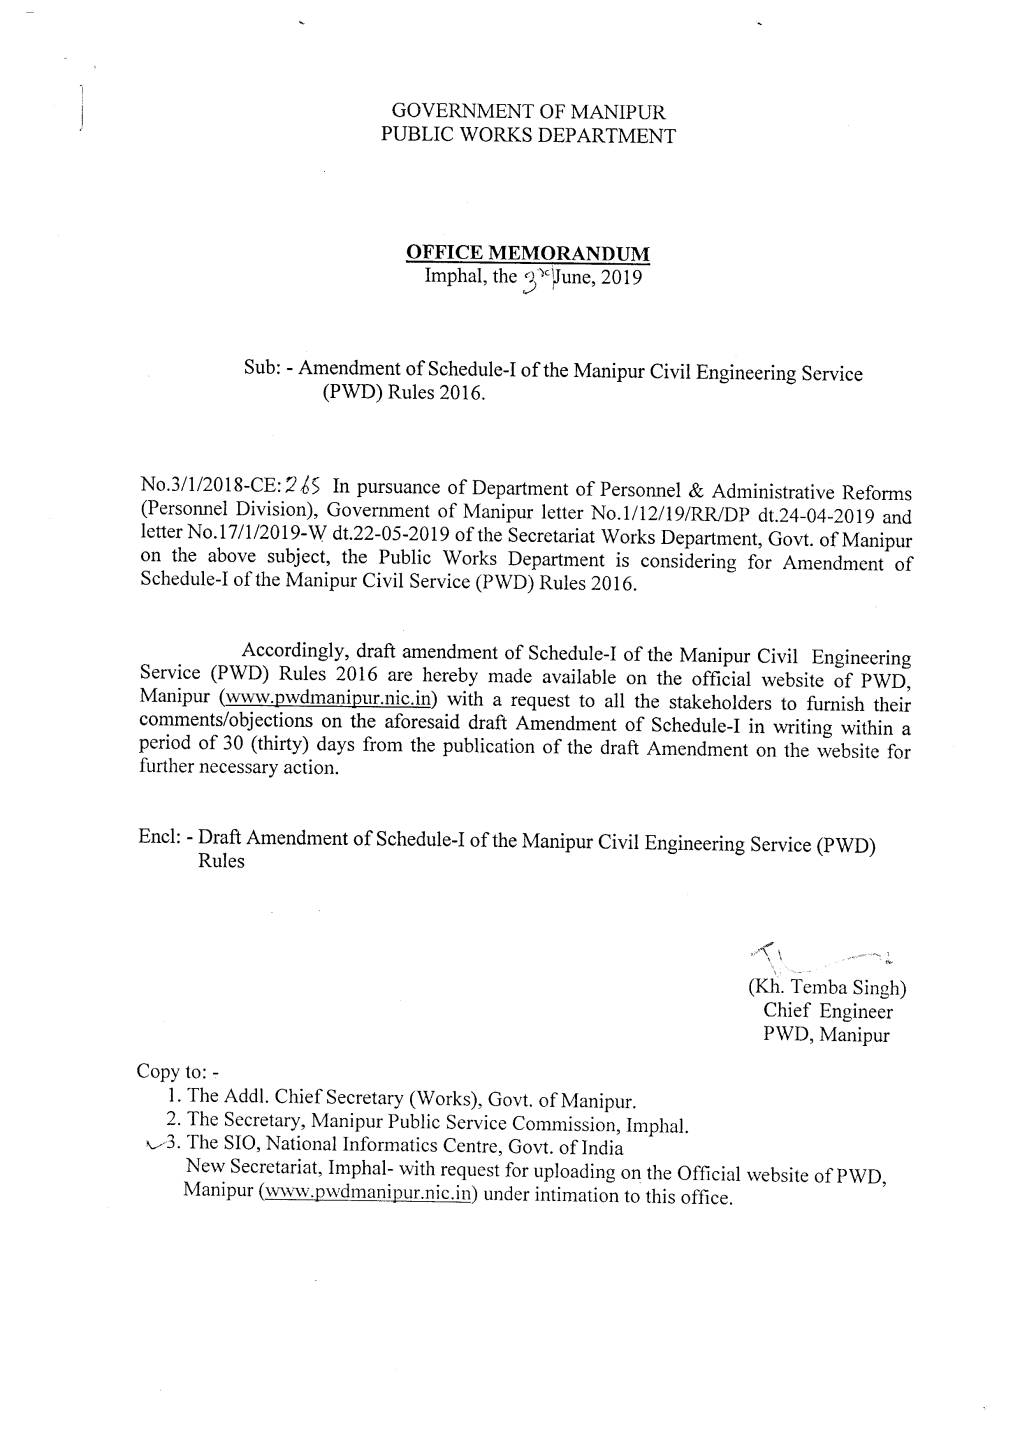 (I)Amendment of Schedule-I of the Manipur Civil Engineering Service